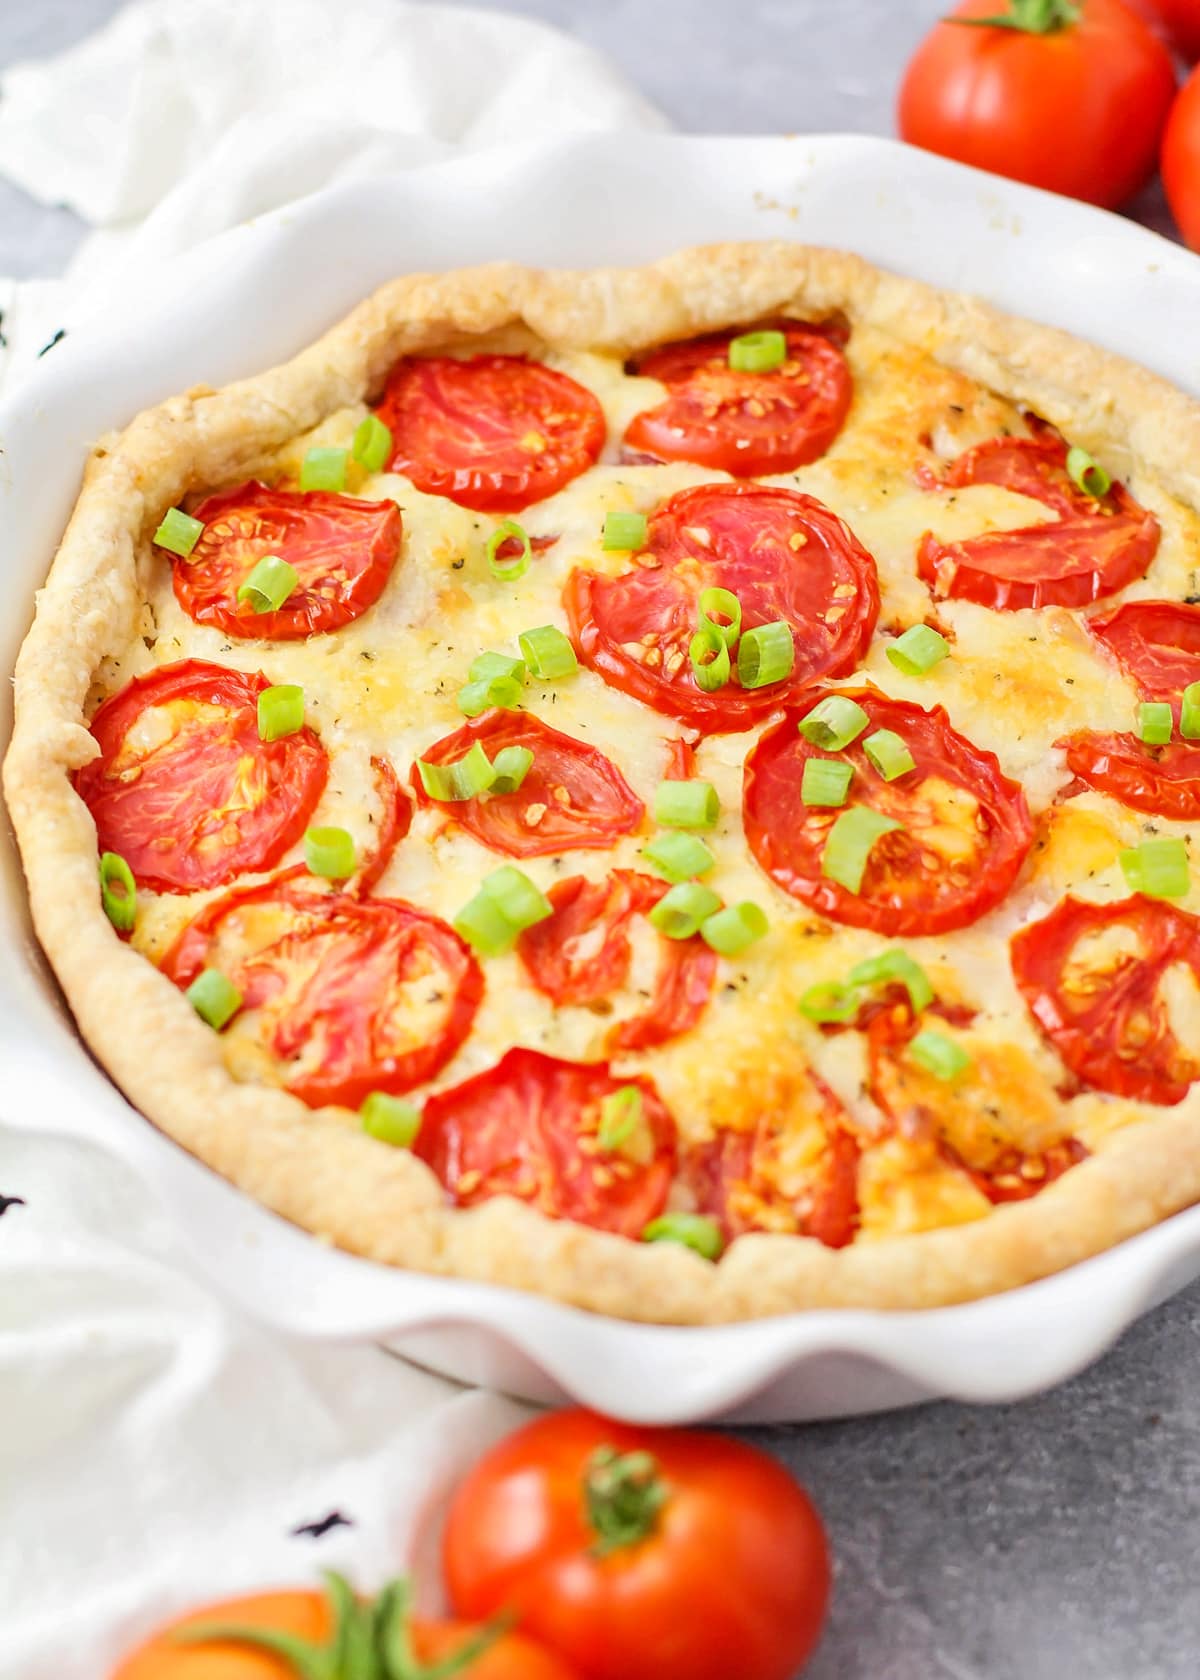 A whole tomato pie topped with green onions and served in a white pie dish.